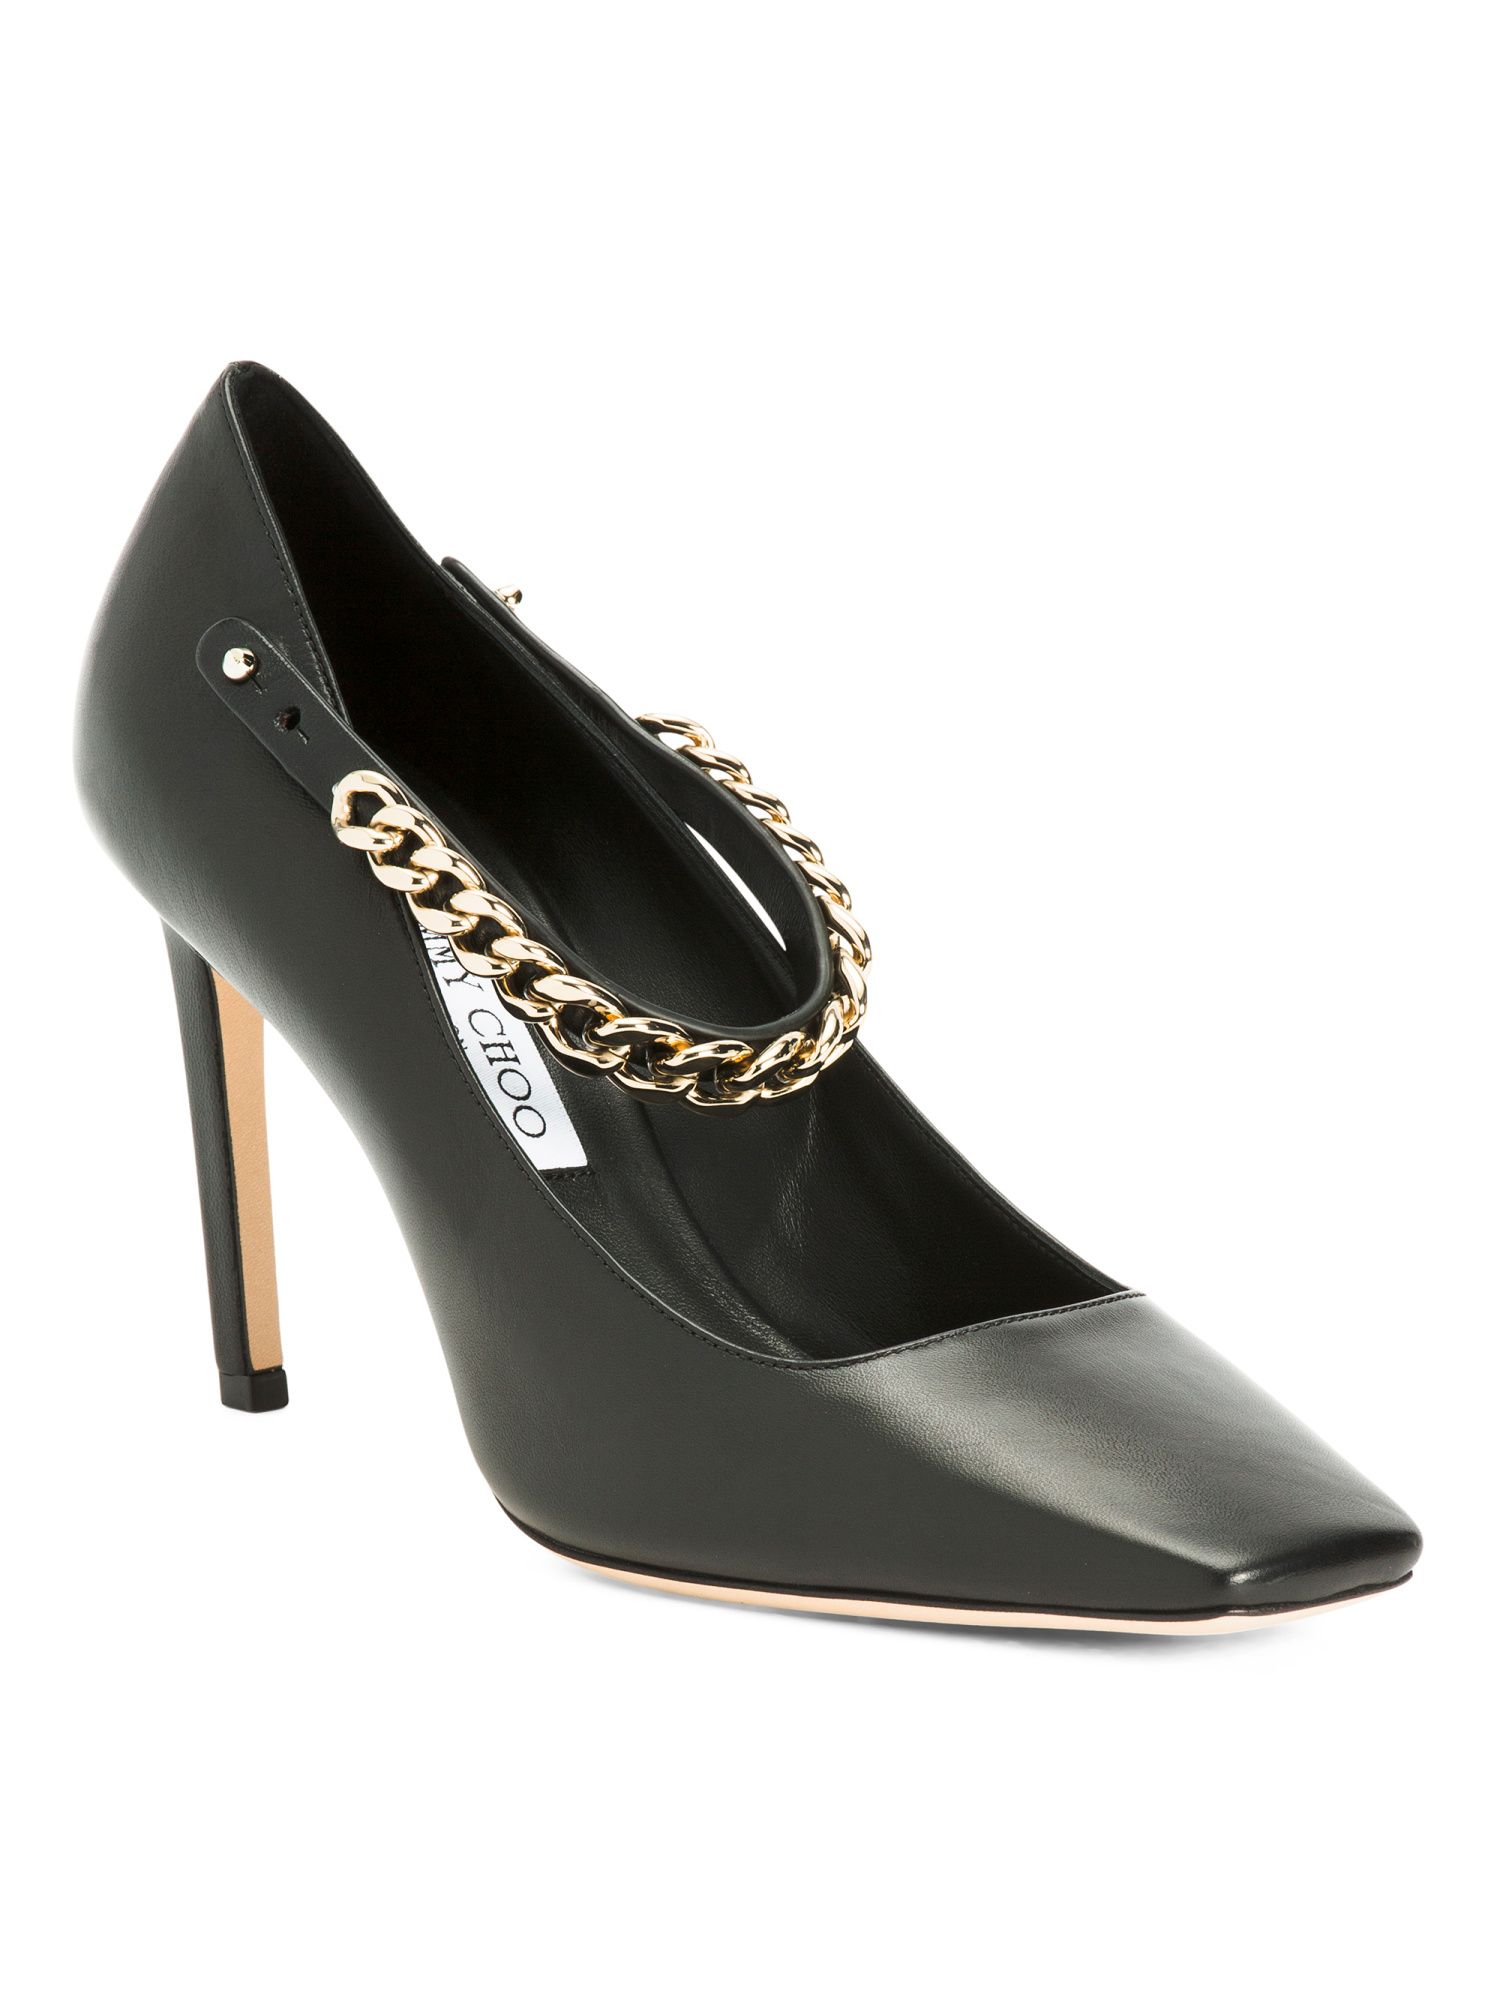 Made In Italy High Heel Leather Shoes | TJ Maxx